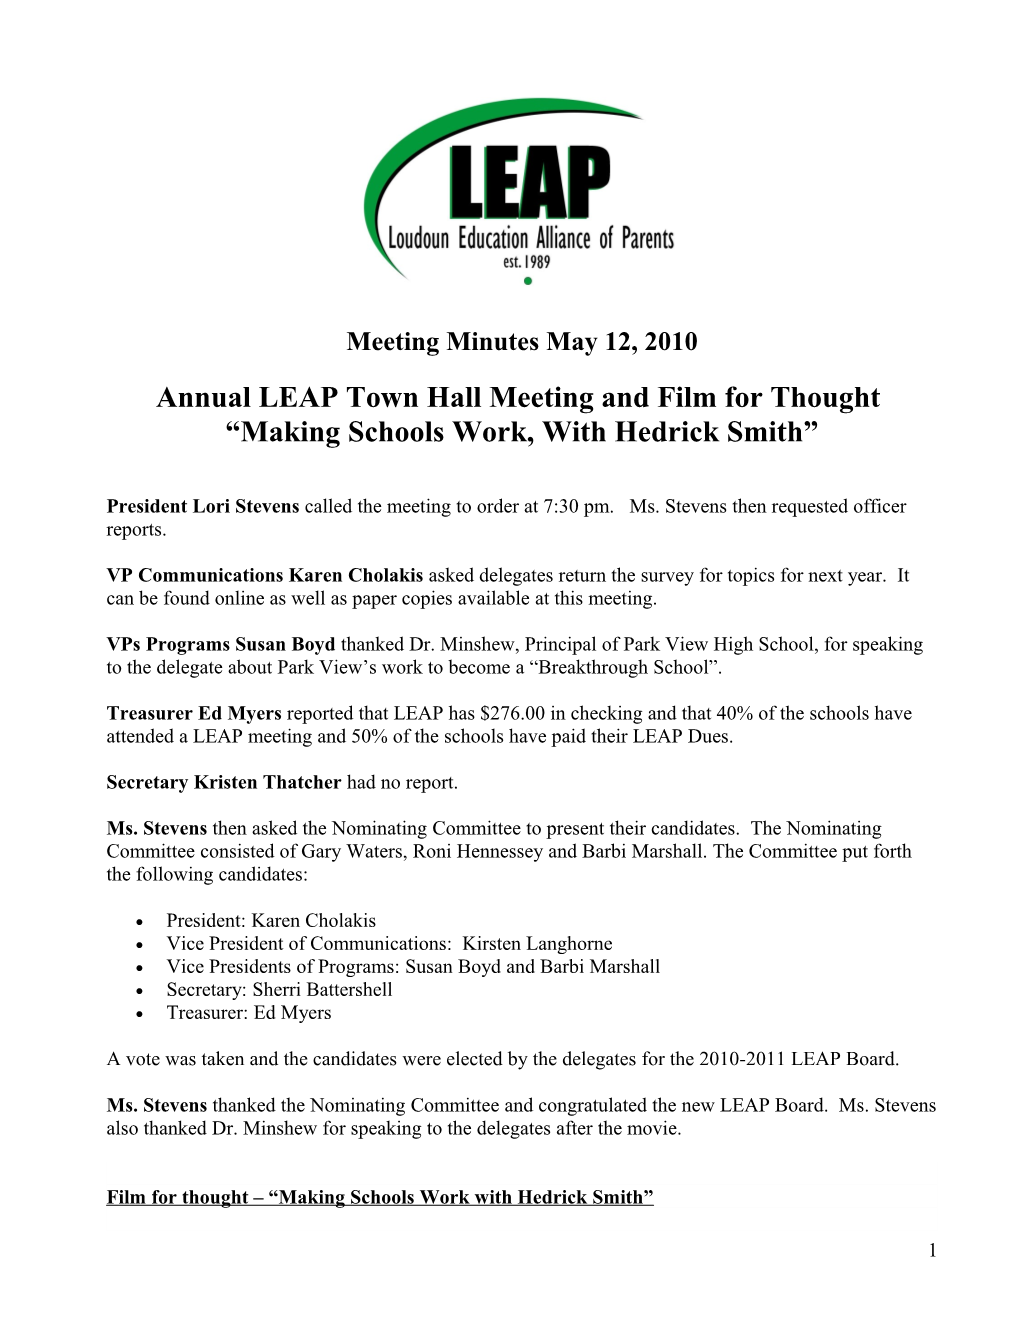 Annual LEAP Town Hall Meeting and Film for Thought